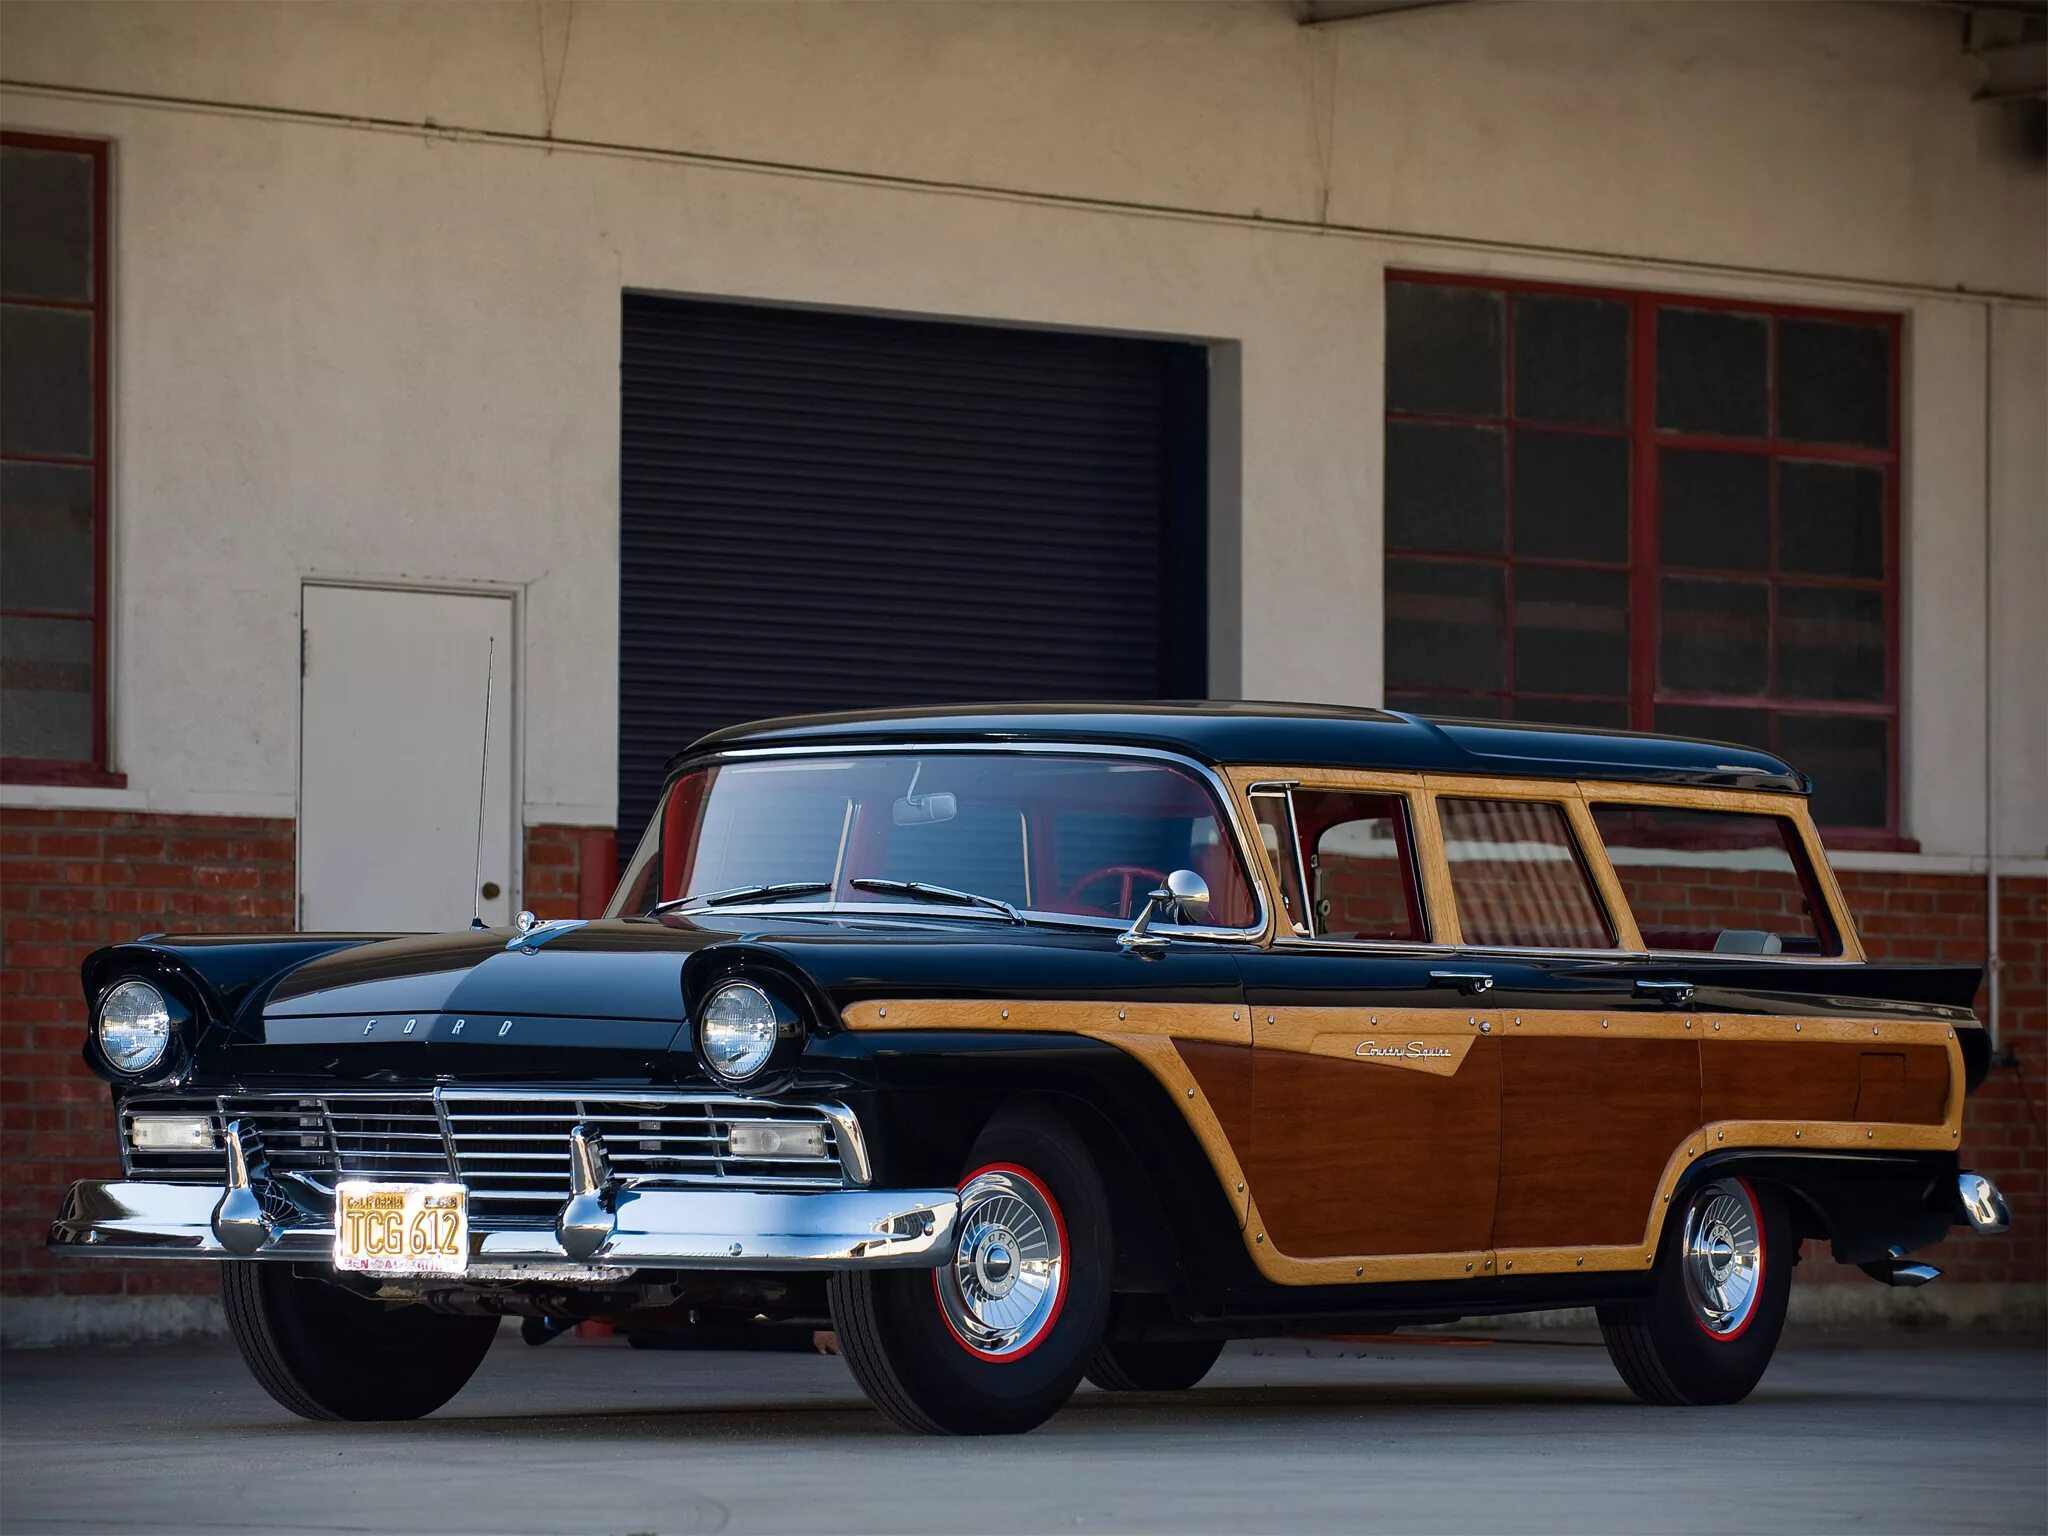 Купить страны машину. Ford Country Squire 1957. Ford Country Squire Station Wagon 1957. Ford Country Squire. Ford Country Squire IV.